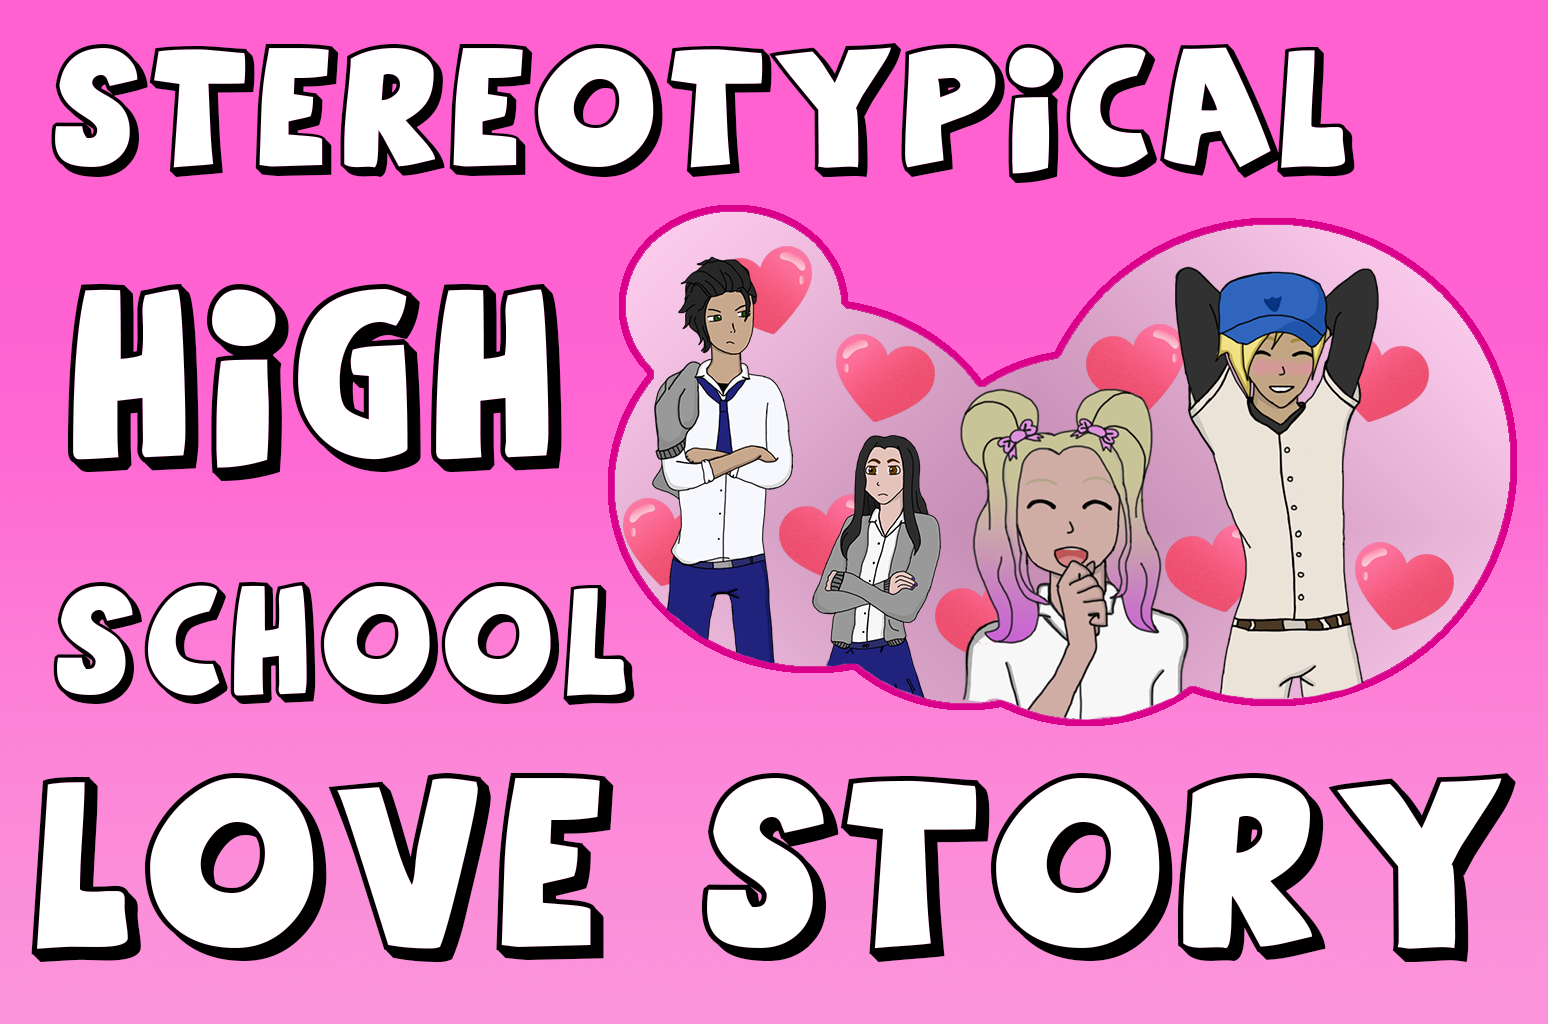 Stereotypical High School Love Story